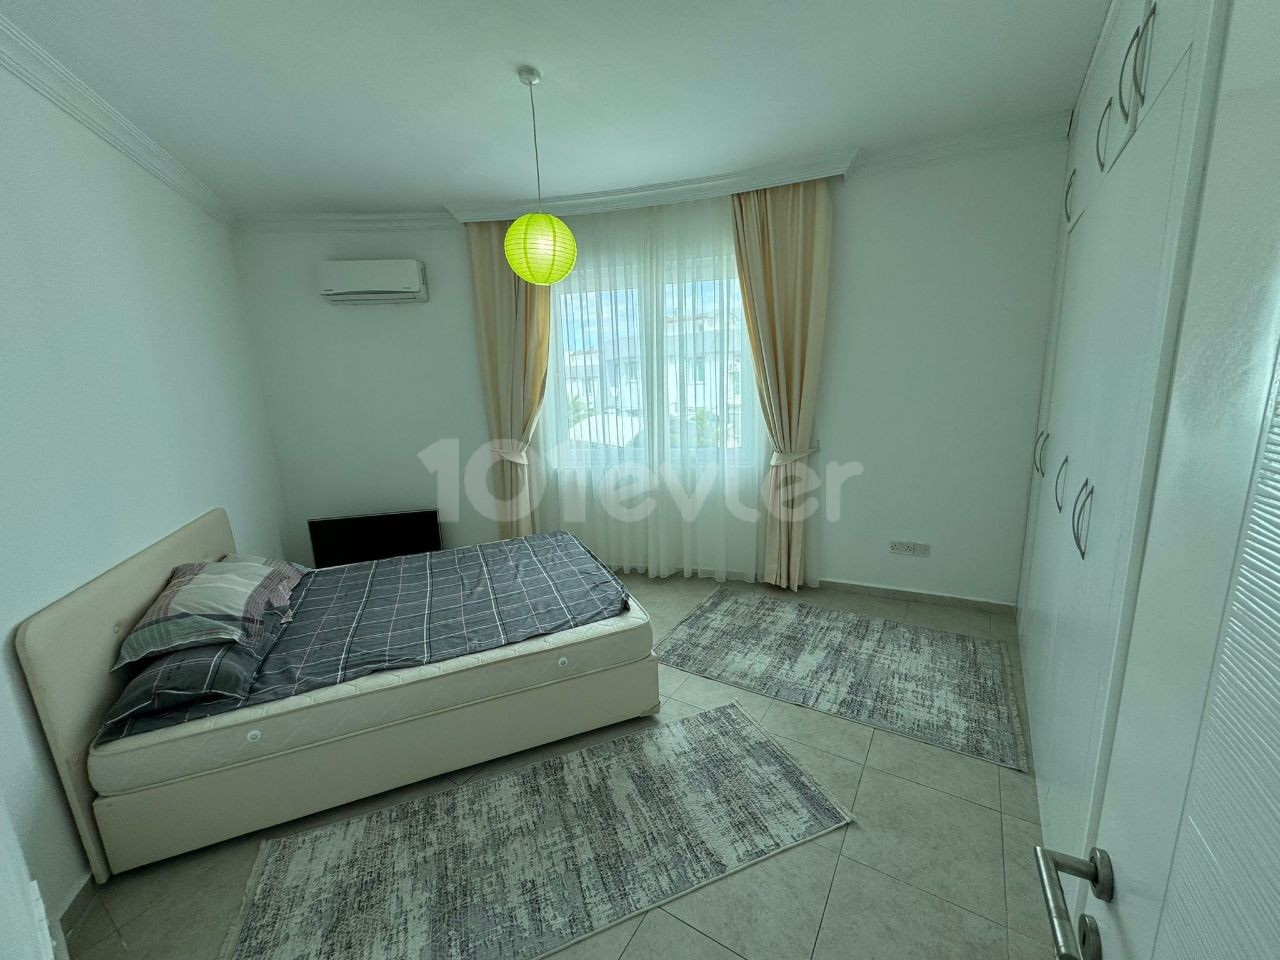 Fully furnished 1+1 flat for rent in Karaoğlanoğlu with a communal pool